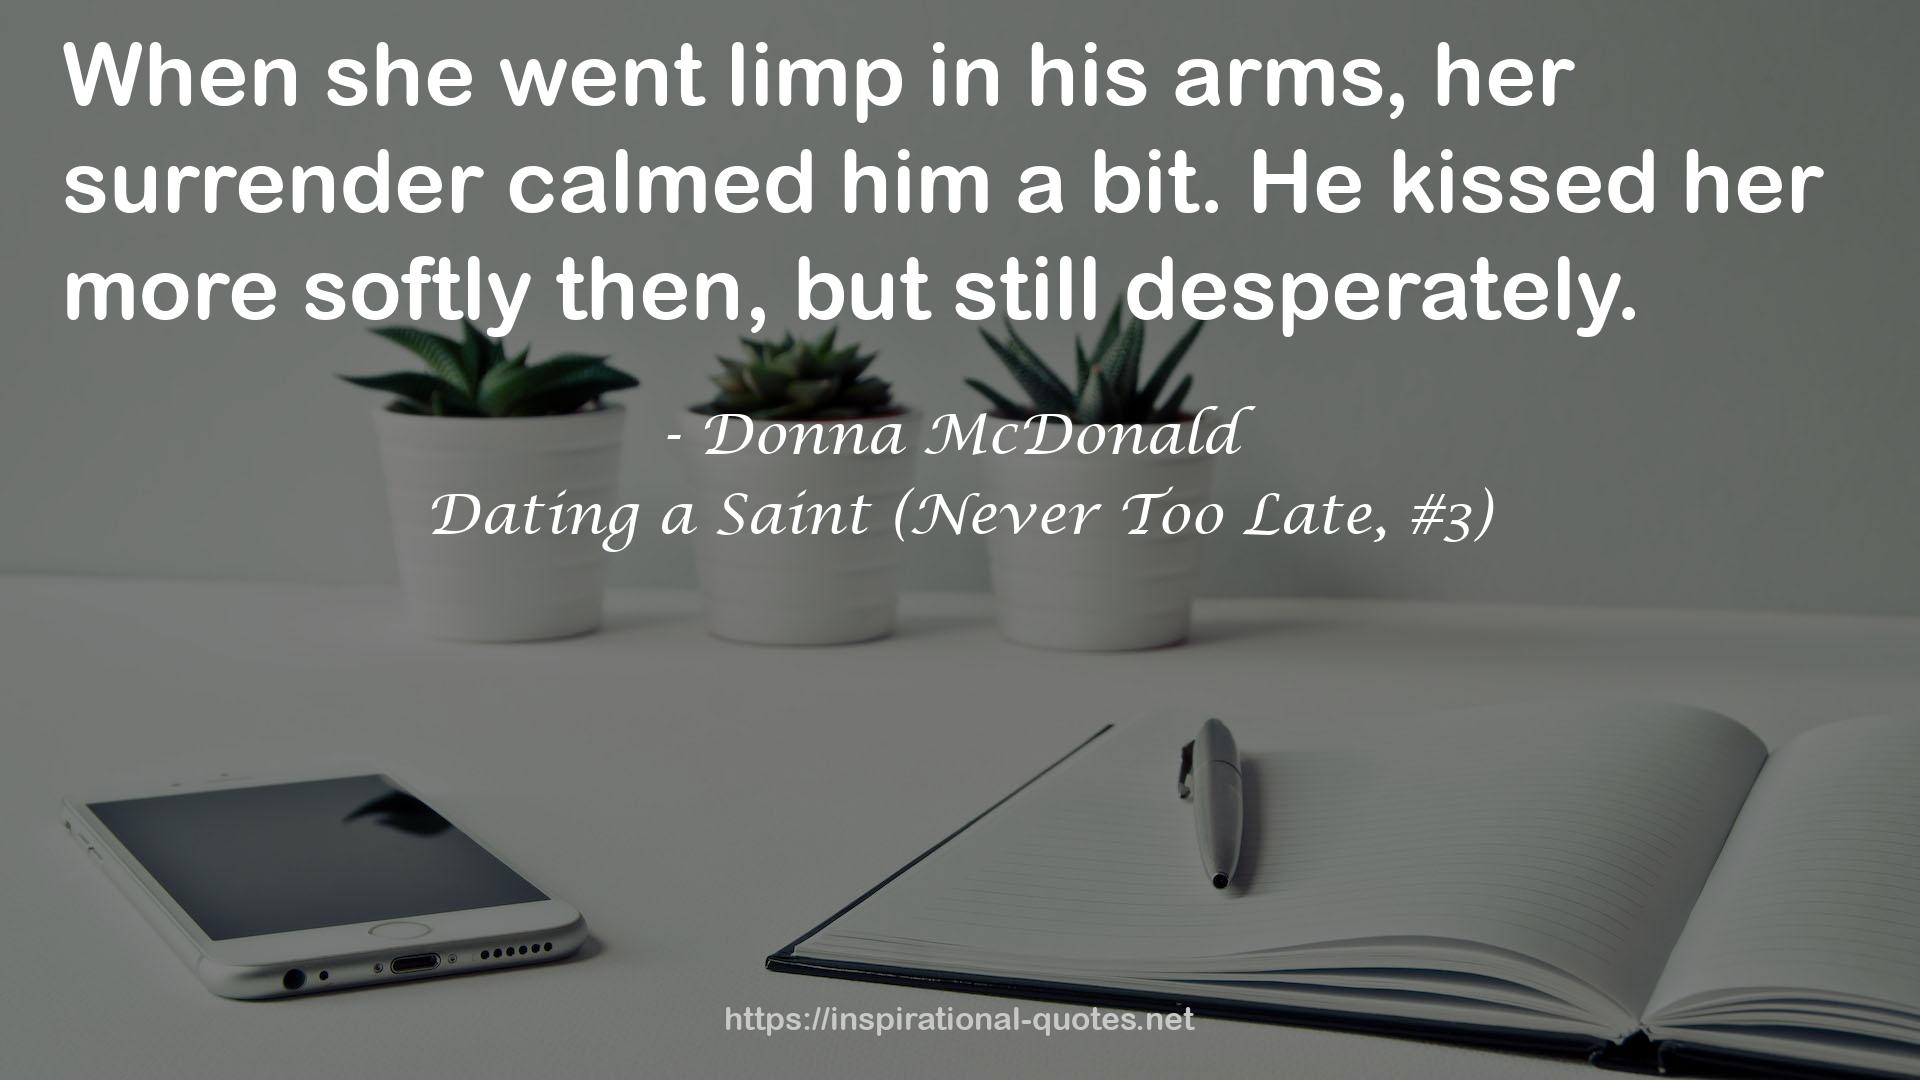 Dating a Saint (Never Too Late, #3) QUOTES